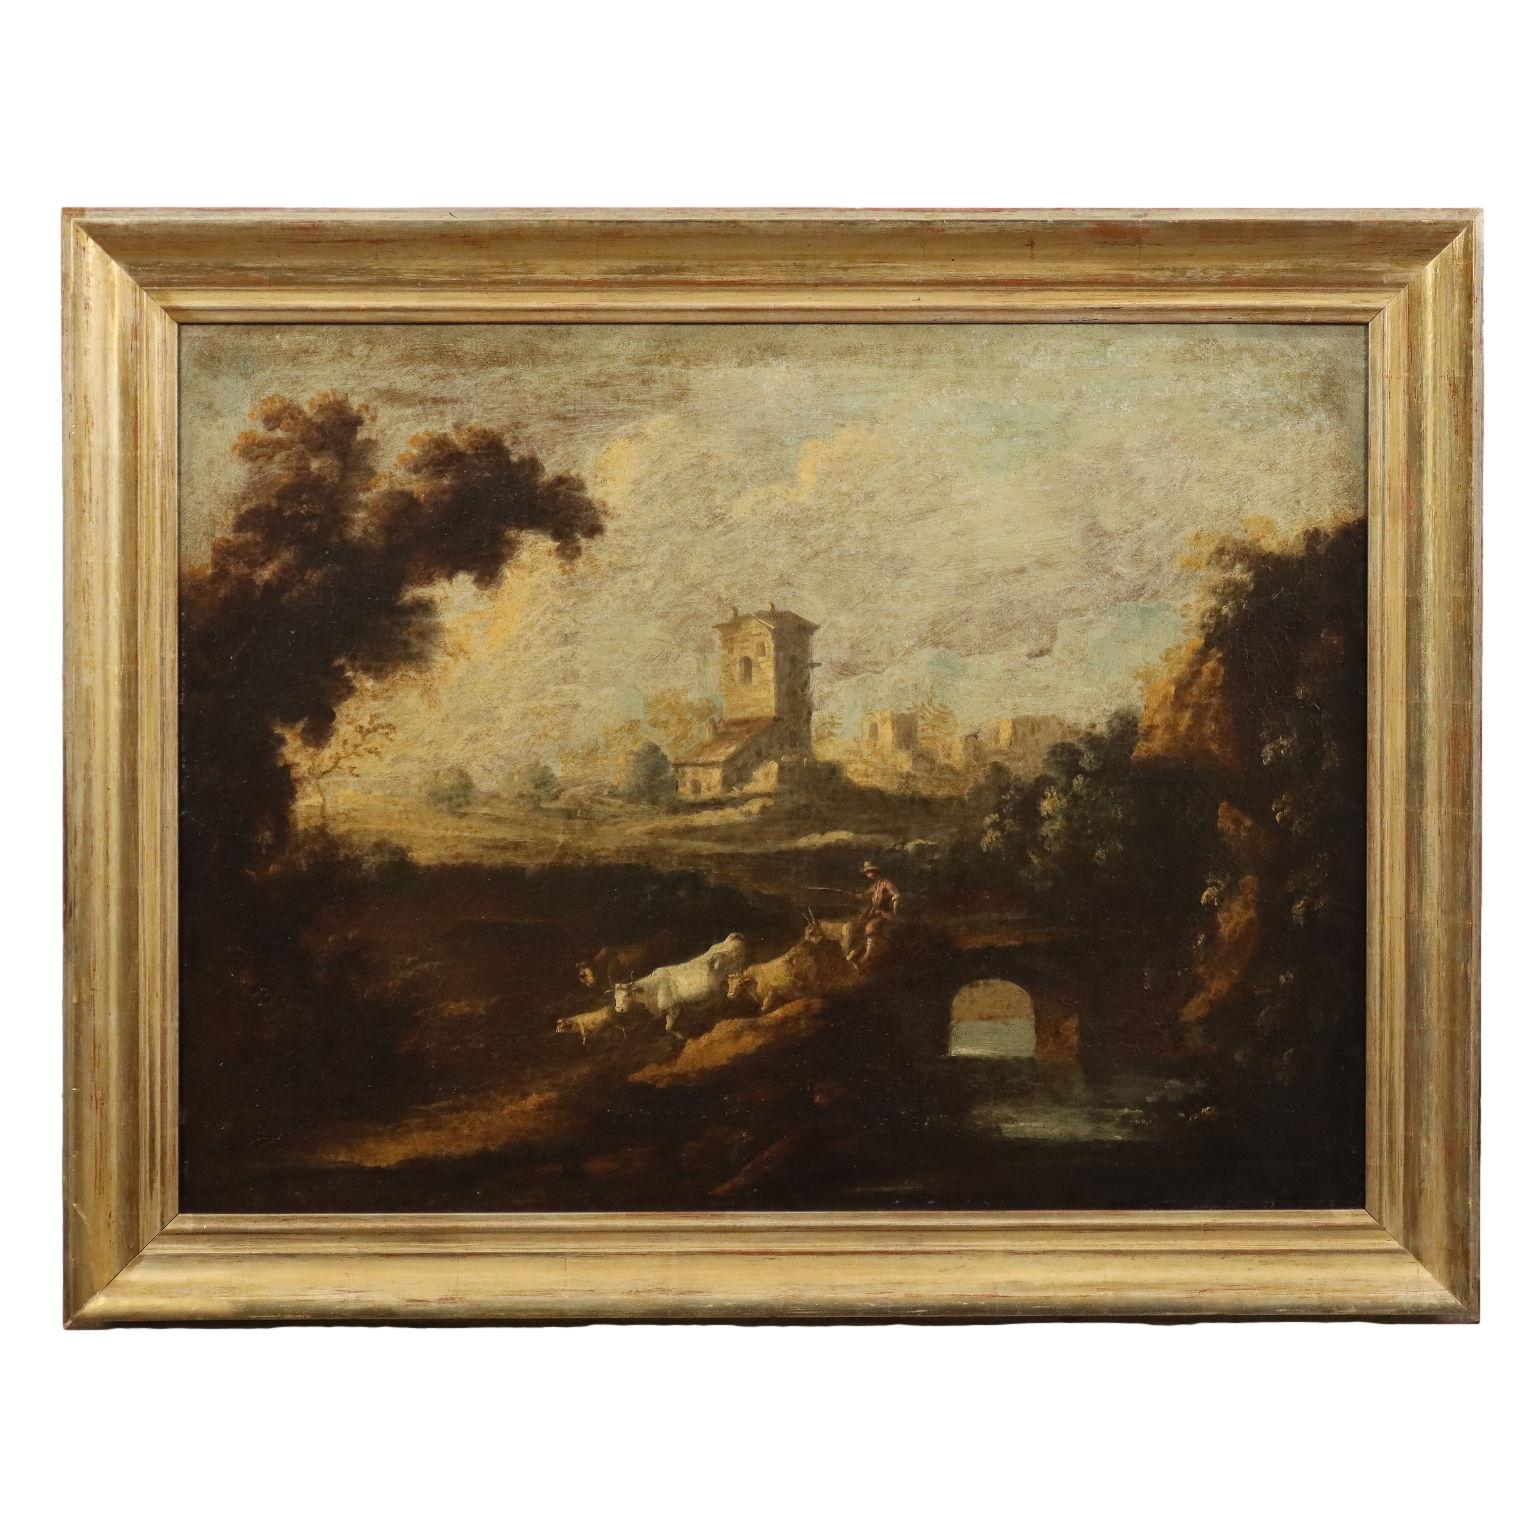 Unknown Landscape Painting - Painting Landscape with Buildings and Figures, 18th century, oil on canvas